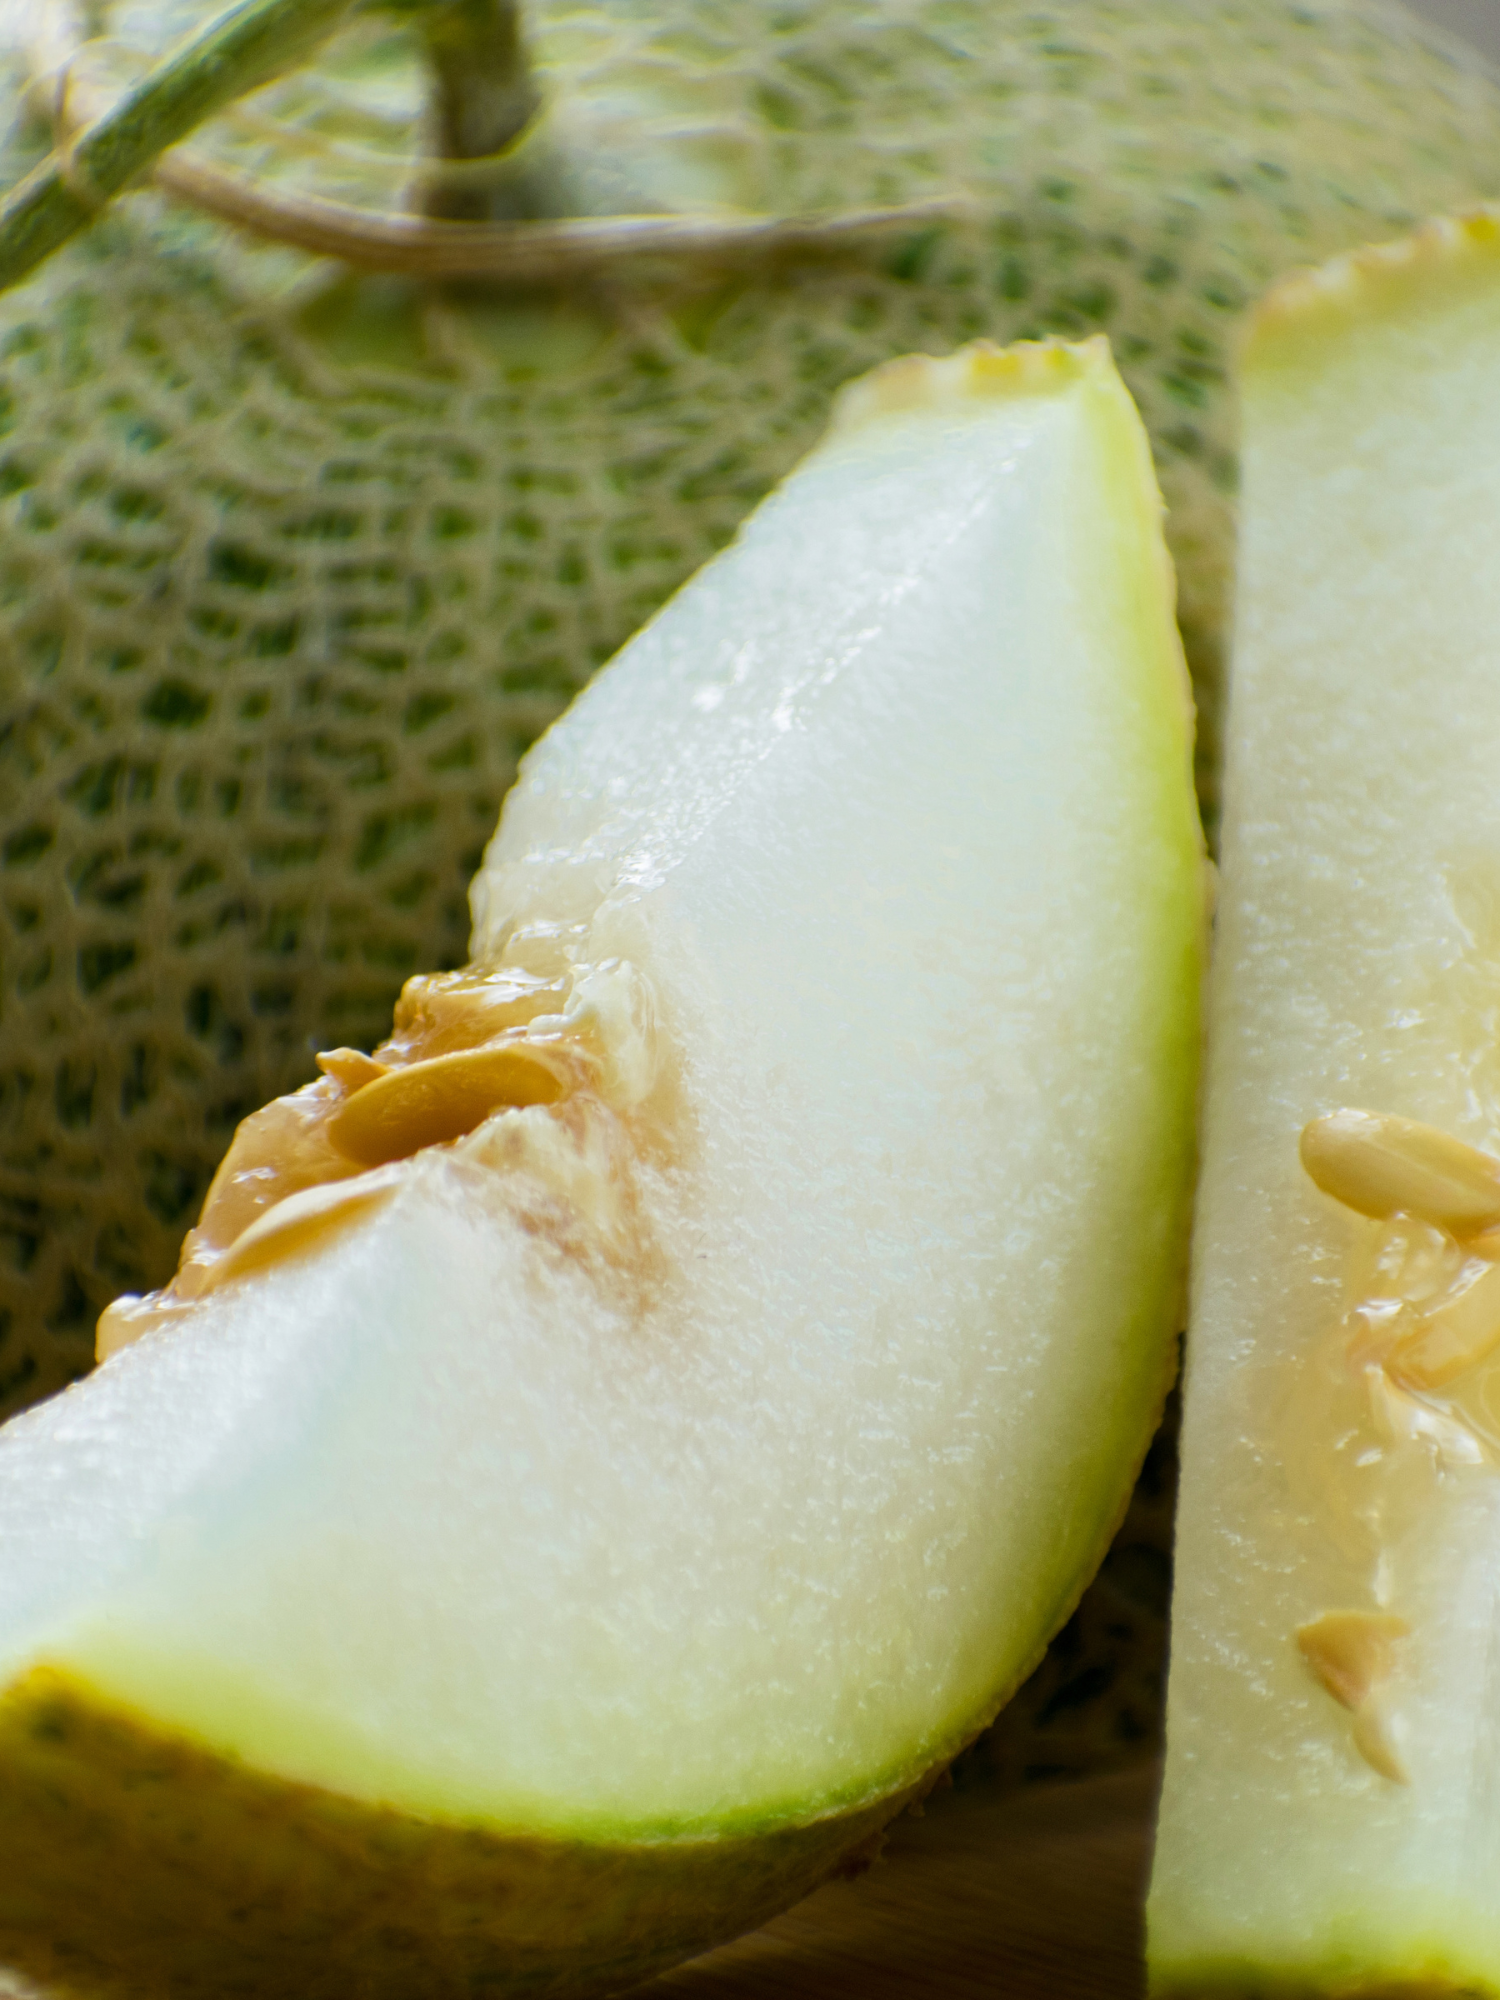 an upclose image of two slices of honeydew melon